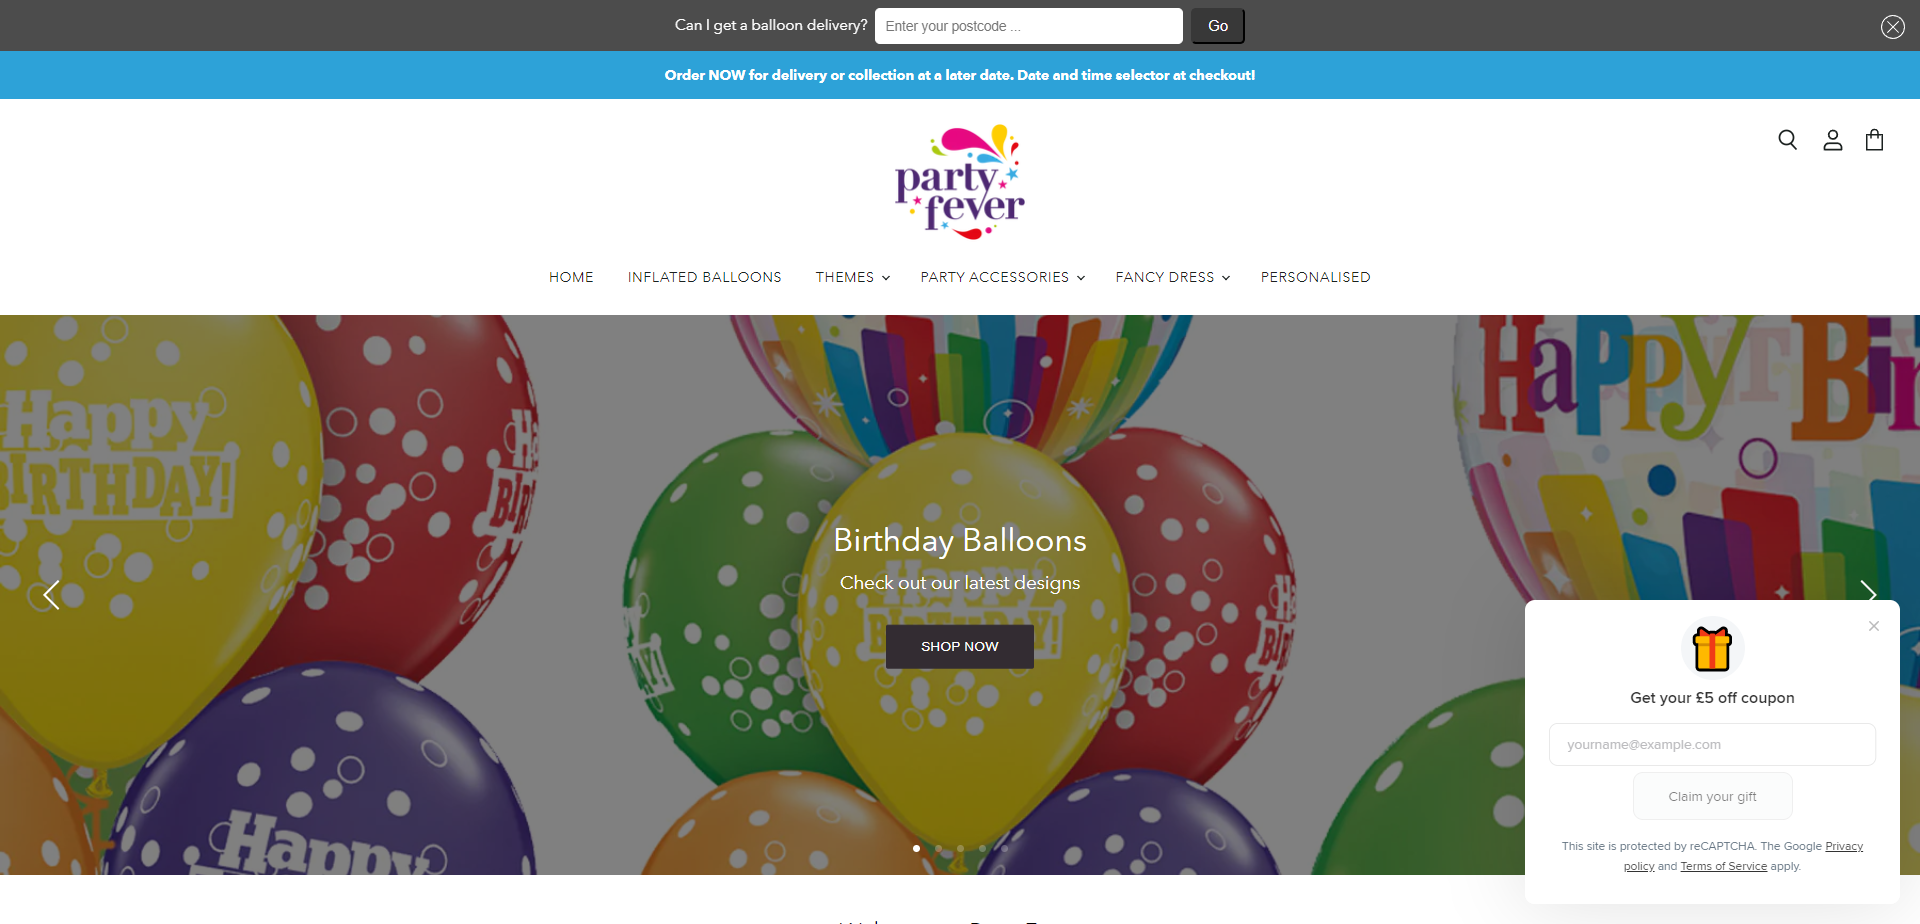 Referral Landing Page for Party Fever